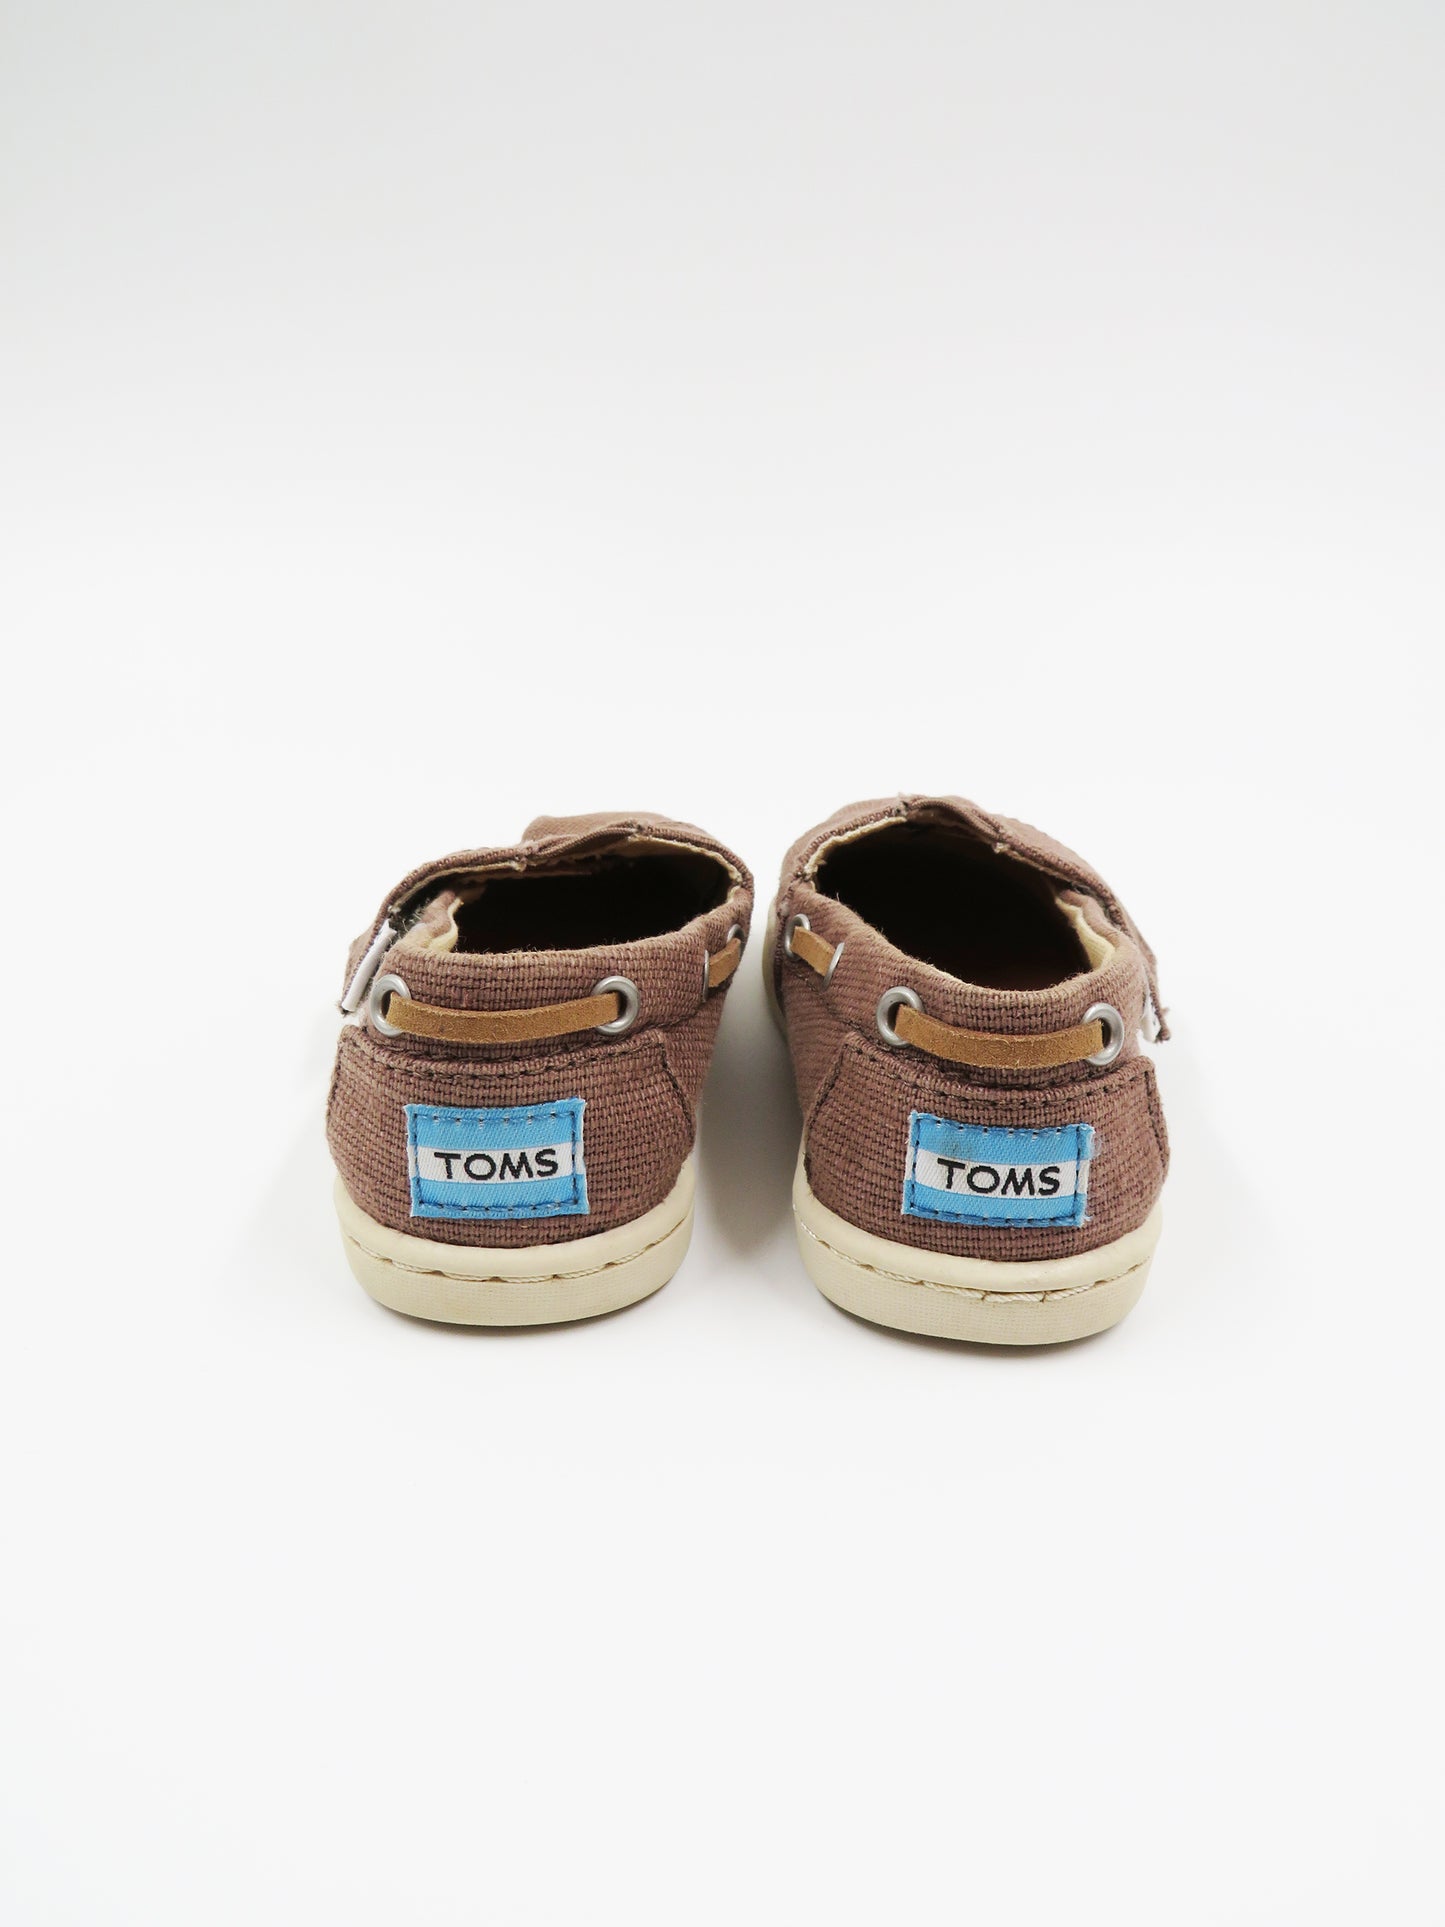 Baby, Toms - size T6